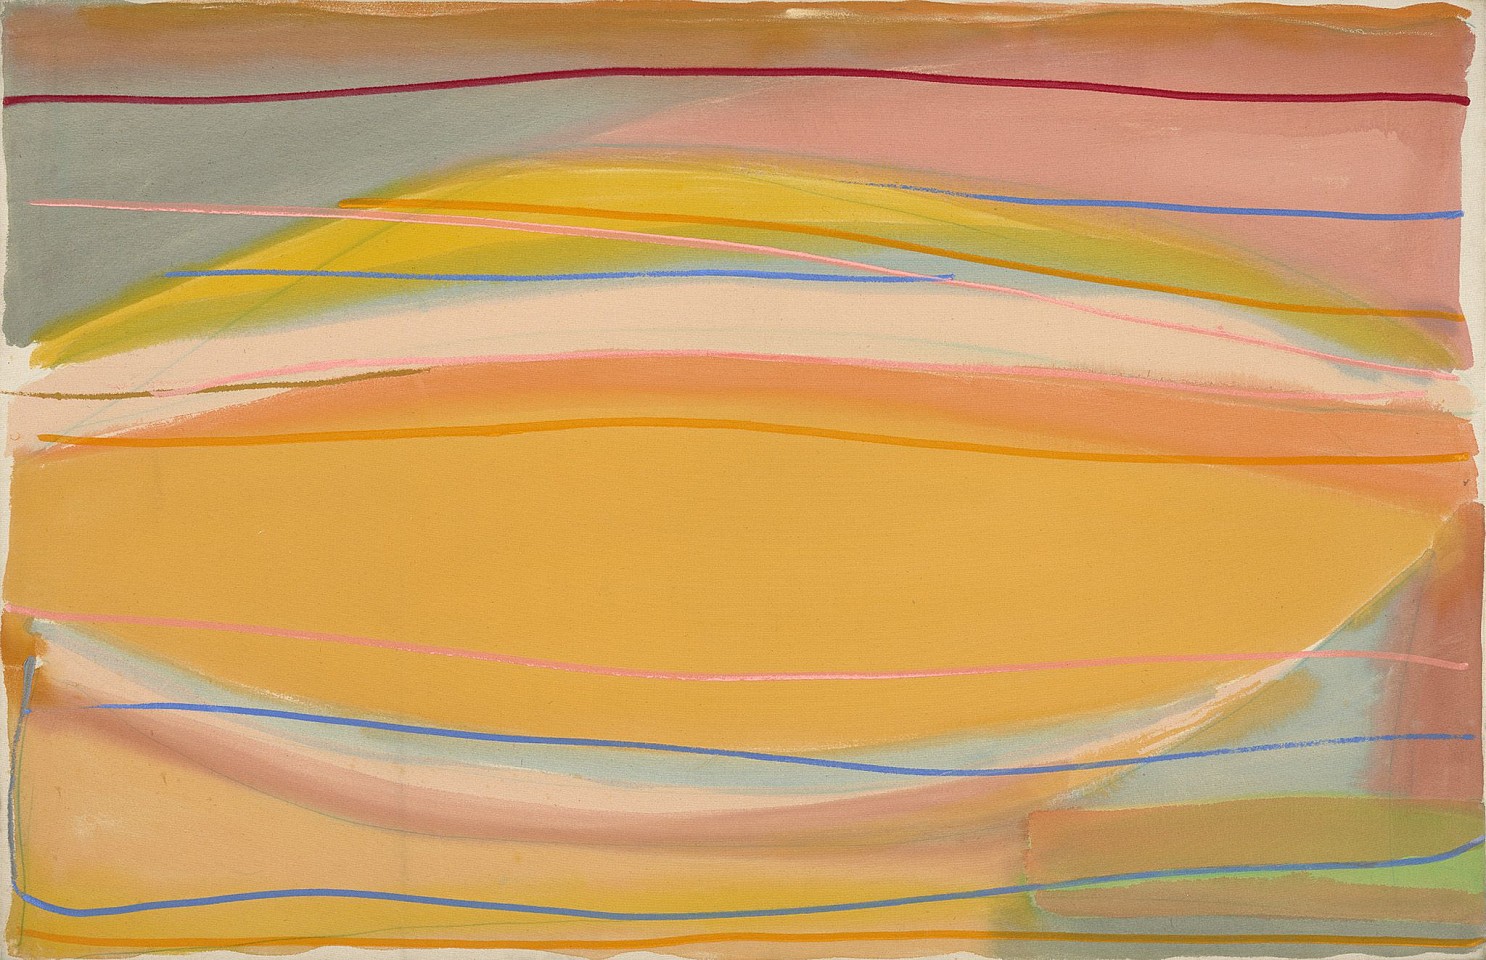 Larry Zox, Oval I, 1998
Acrylic on canvas, 47 3/8 x 73 in. (120.3 x 185.4 cm)
ZOX-00169